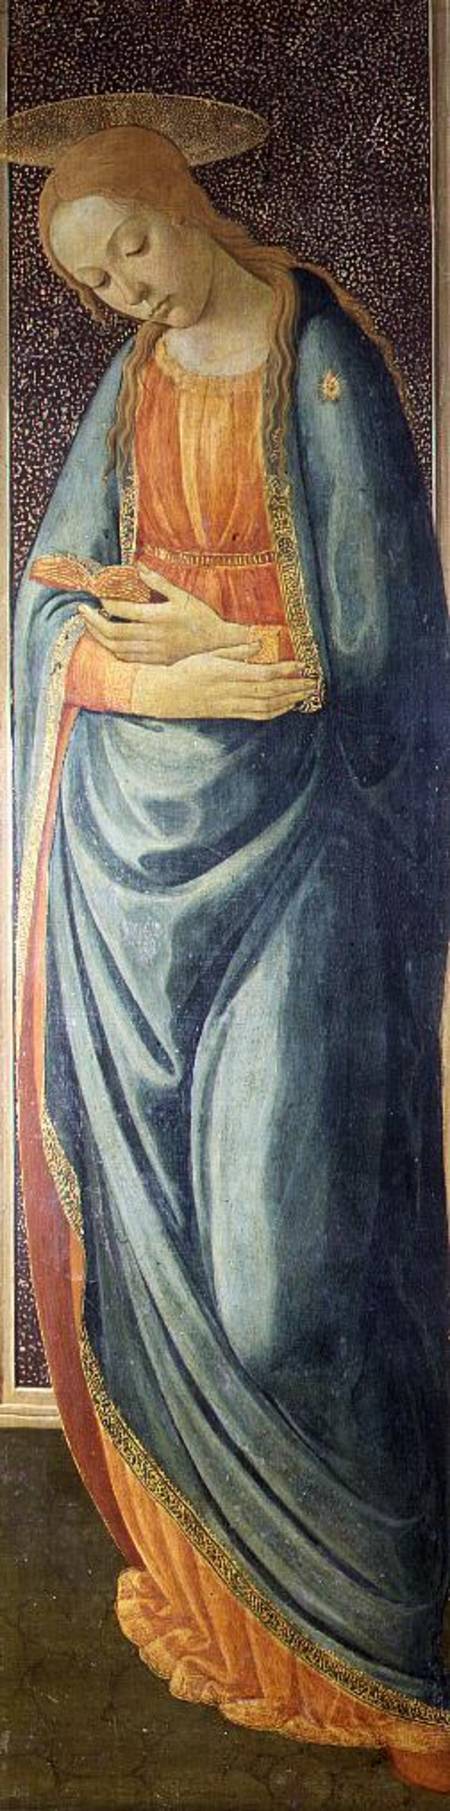 Virgin Mary from Jacopo del Sellaio